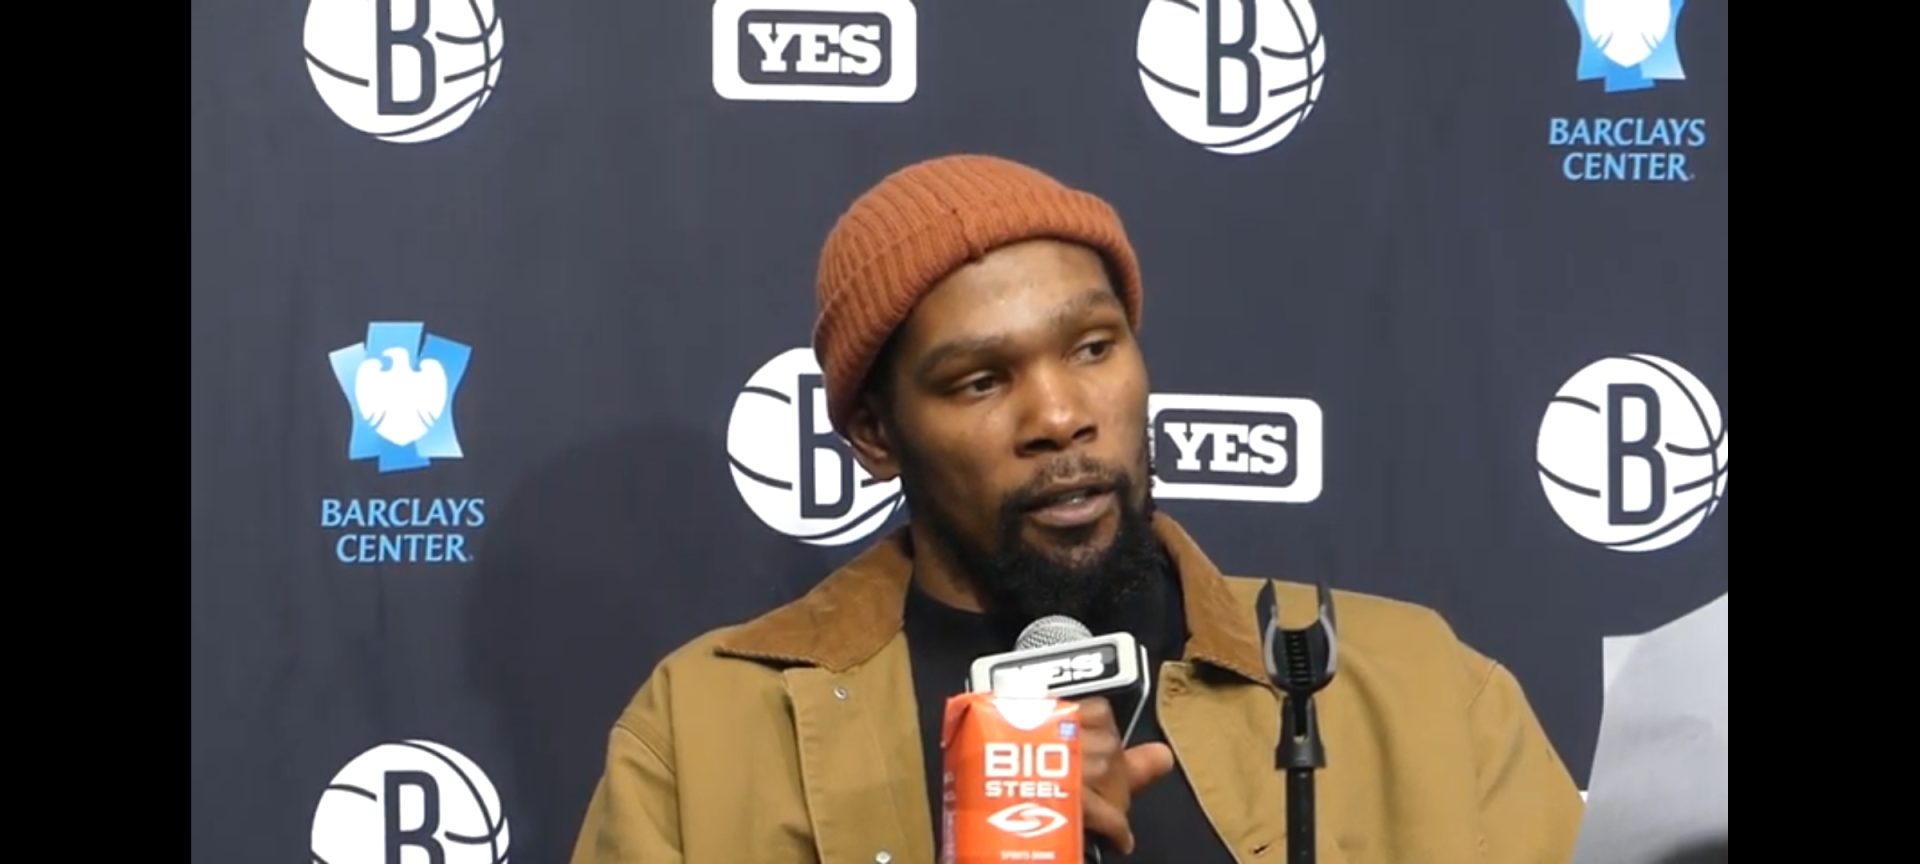 Kevin Durant speaks with the media at Barclays Center in Brooklyn, New York (Photo by Derrel Jazz Johnson for rolling out)